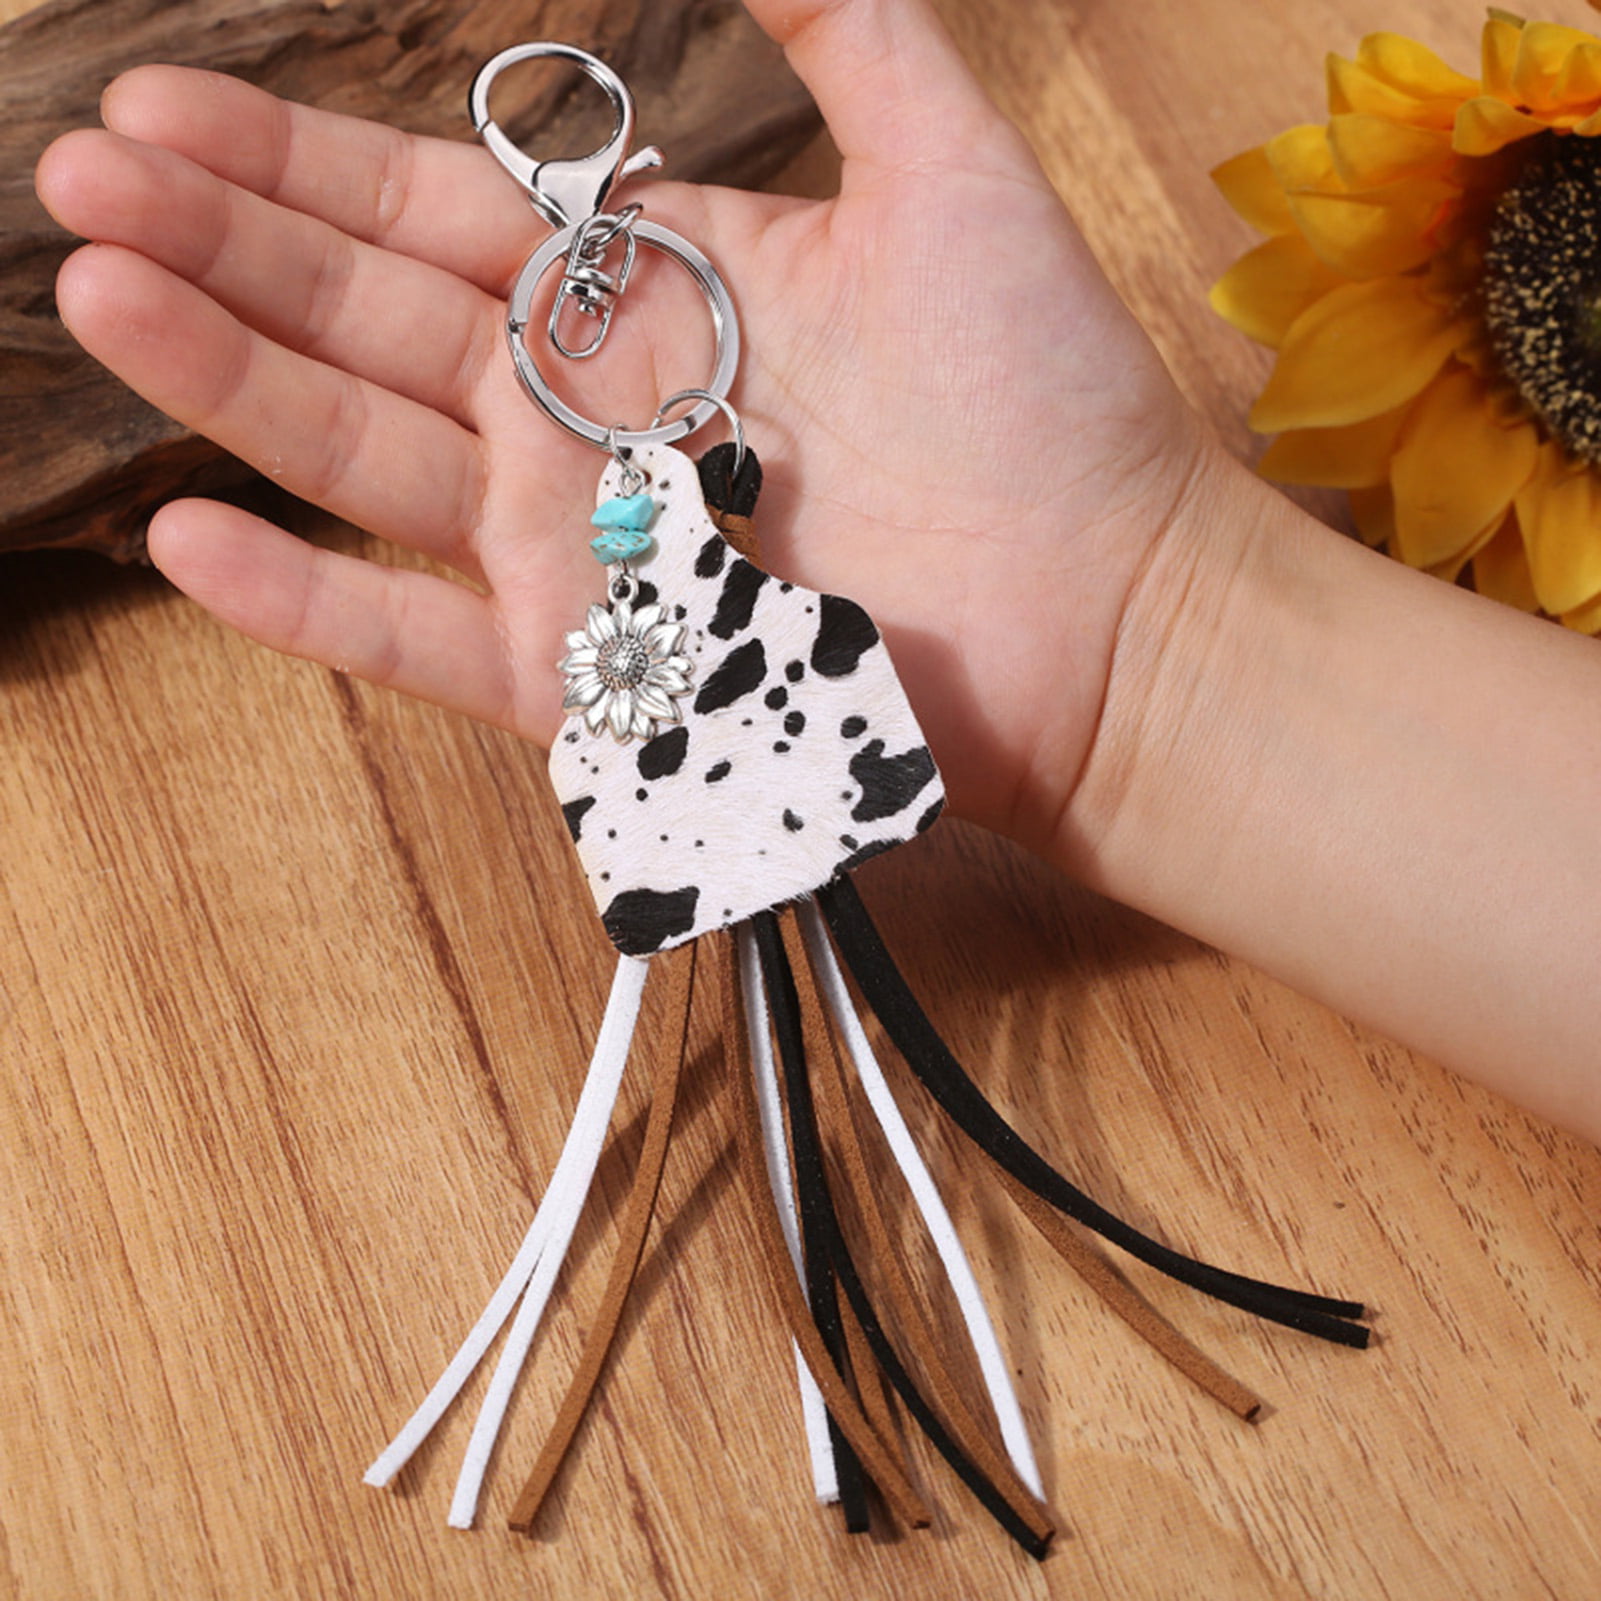 Designer PU Leather Keychain With Cow Print For Men And Women